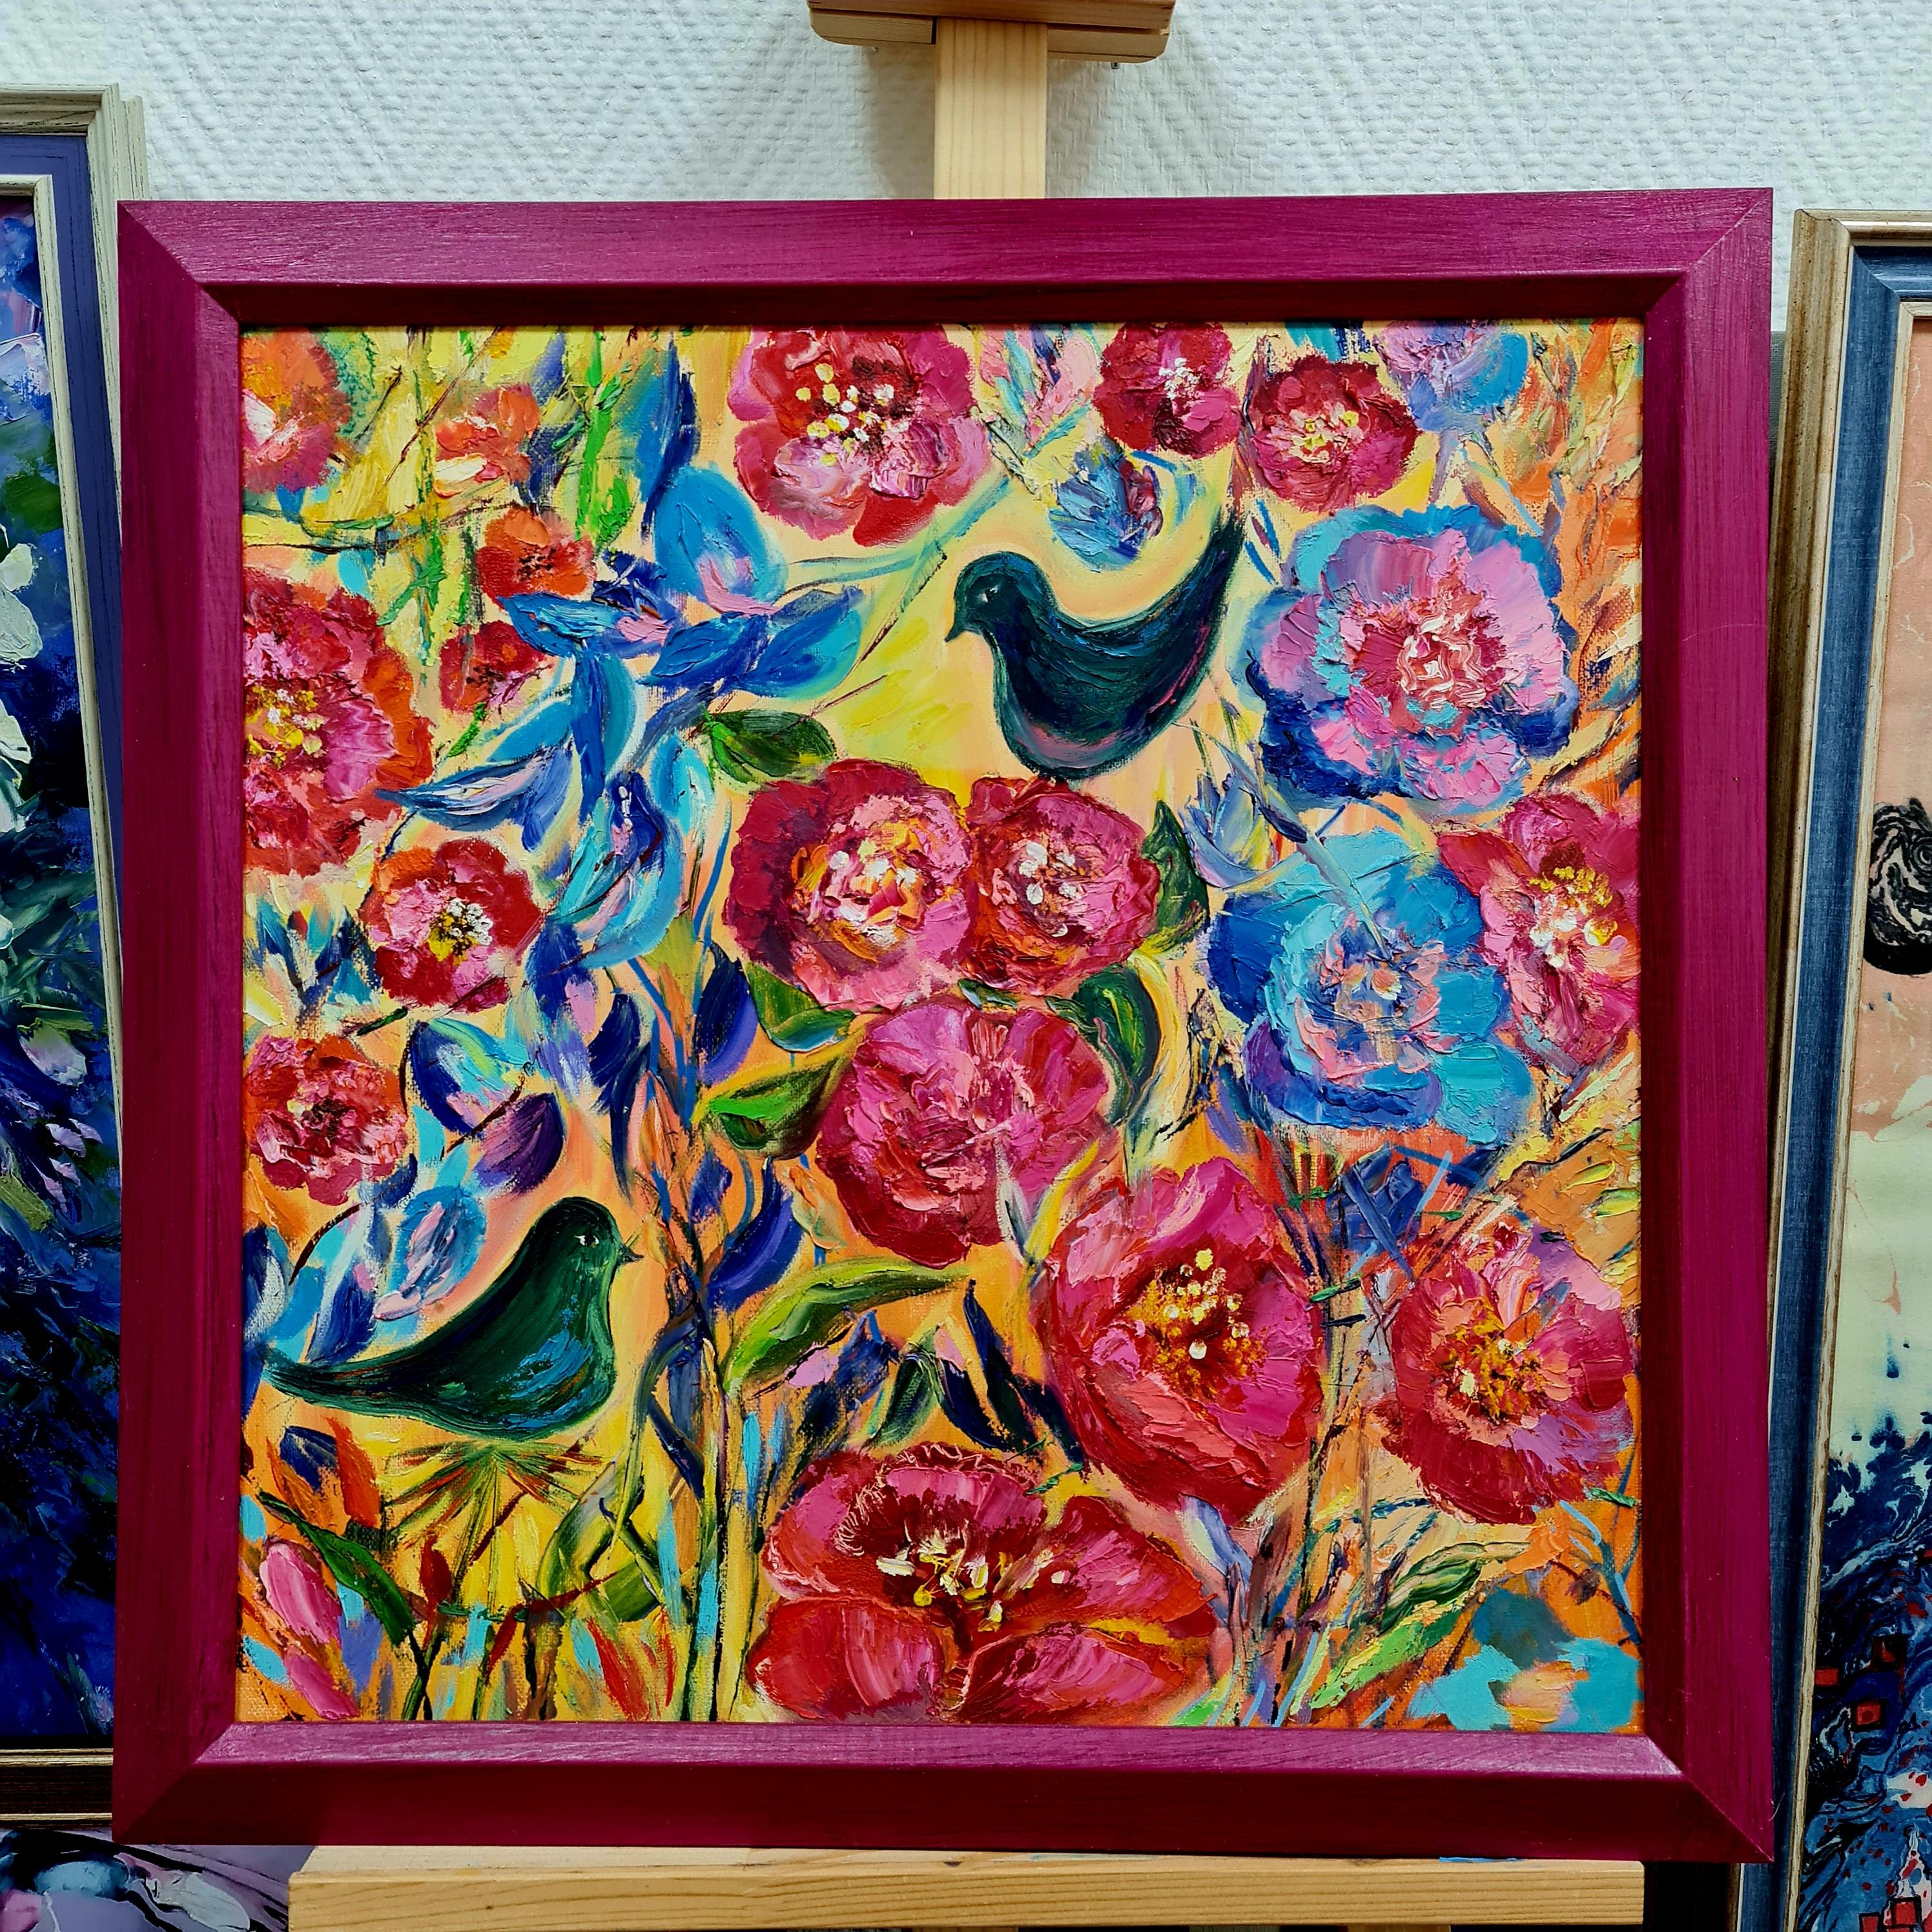 Funny birds in the Garden of Eden. The flowering of plants is in full swing. Bright colors, positive birds, beautiful flowers. Everyone who looks at this picture is smiling. 

This is the original piece of art made by hand from beginning to end.